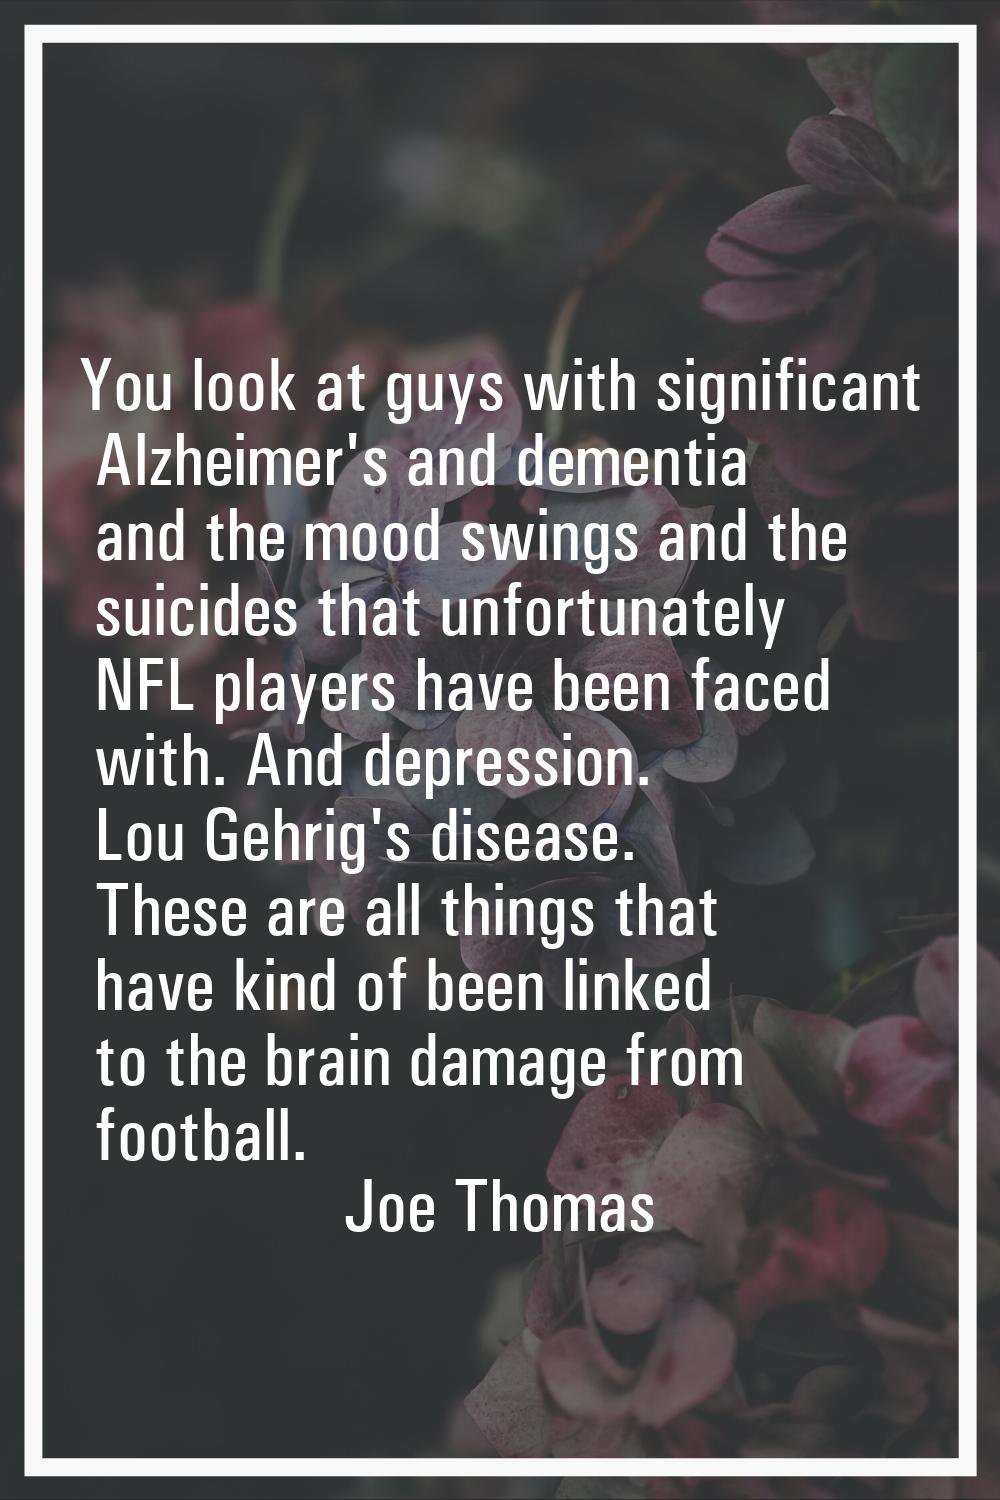 You look at guys with significant Alzheimer's and dementia and the mood swings and the suicides tha